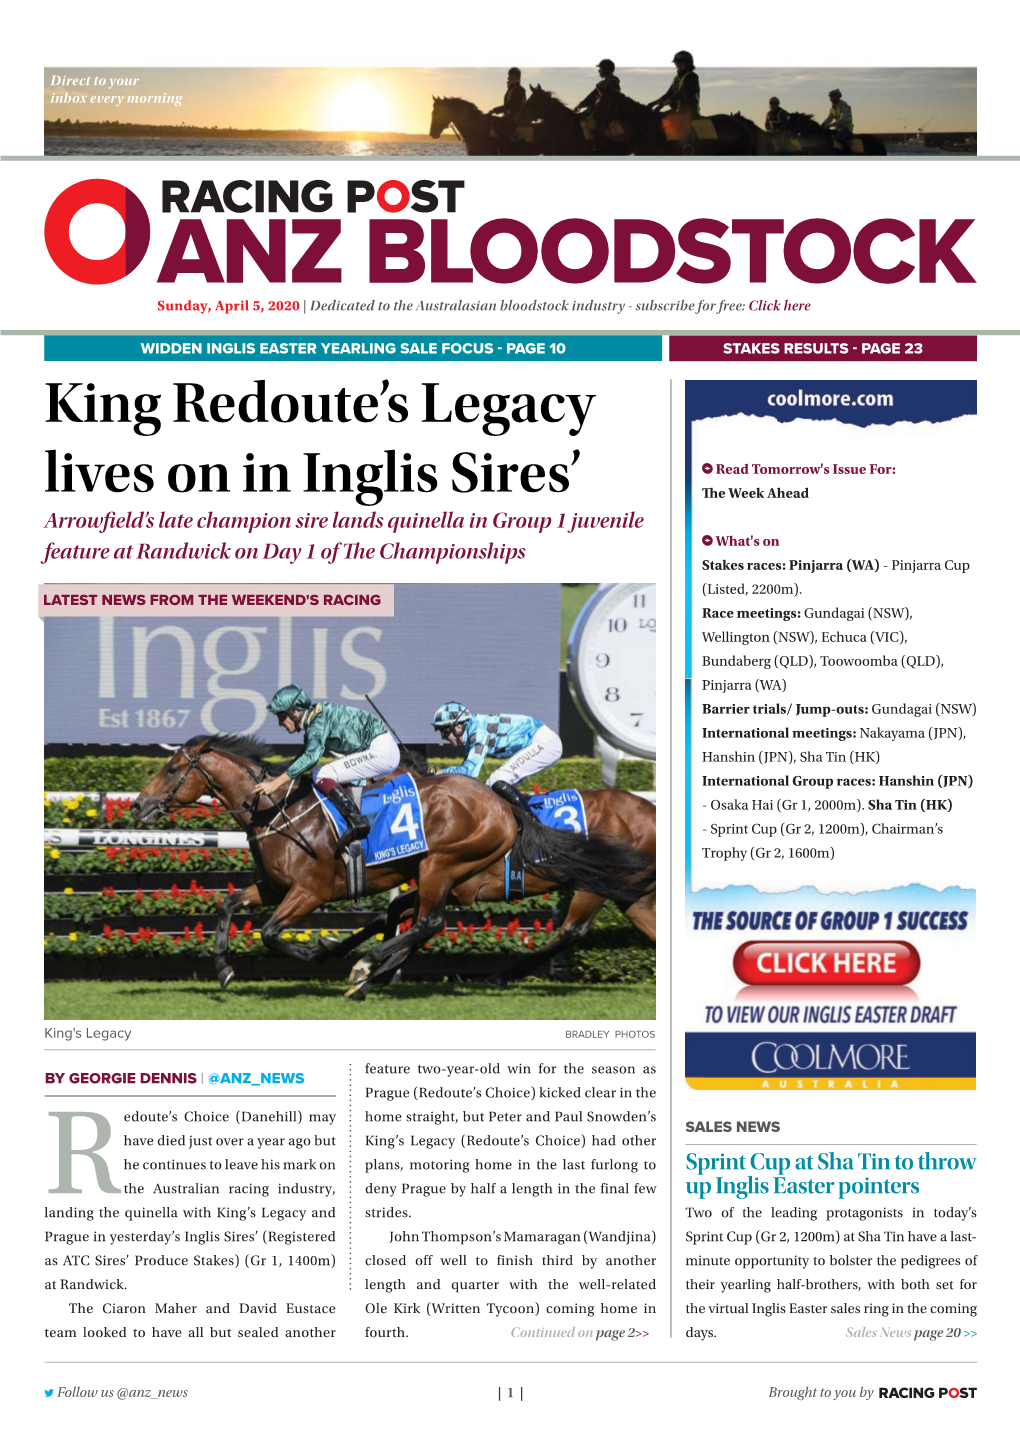 King Redoute's Legacy Lives on in Inglis Sires'